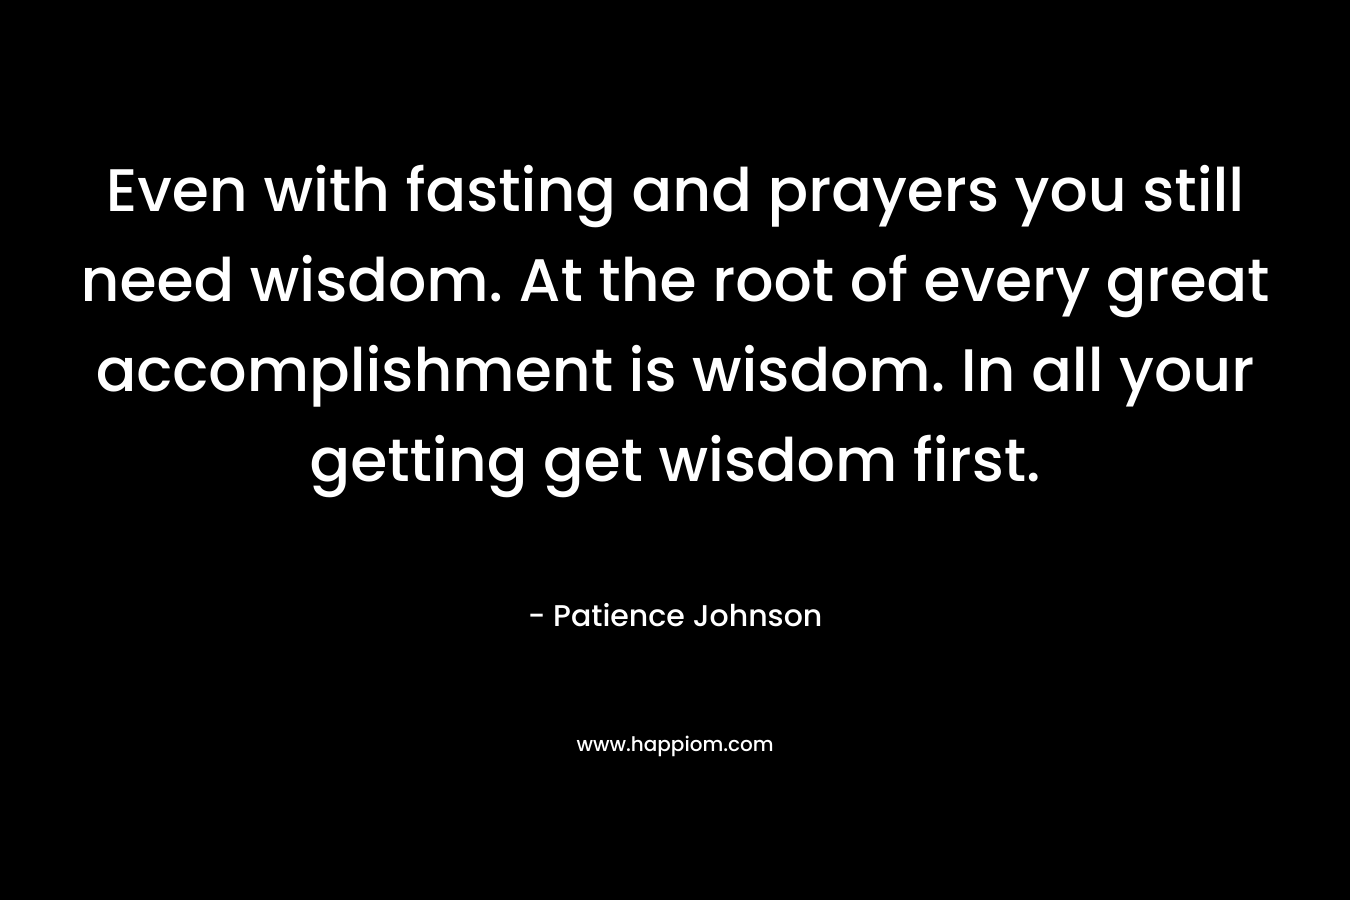 Even with fasting and prayers you still need wisdom. At the root of every great accomplishment is wisdom. In all your getting get wisdom first.